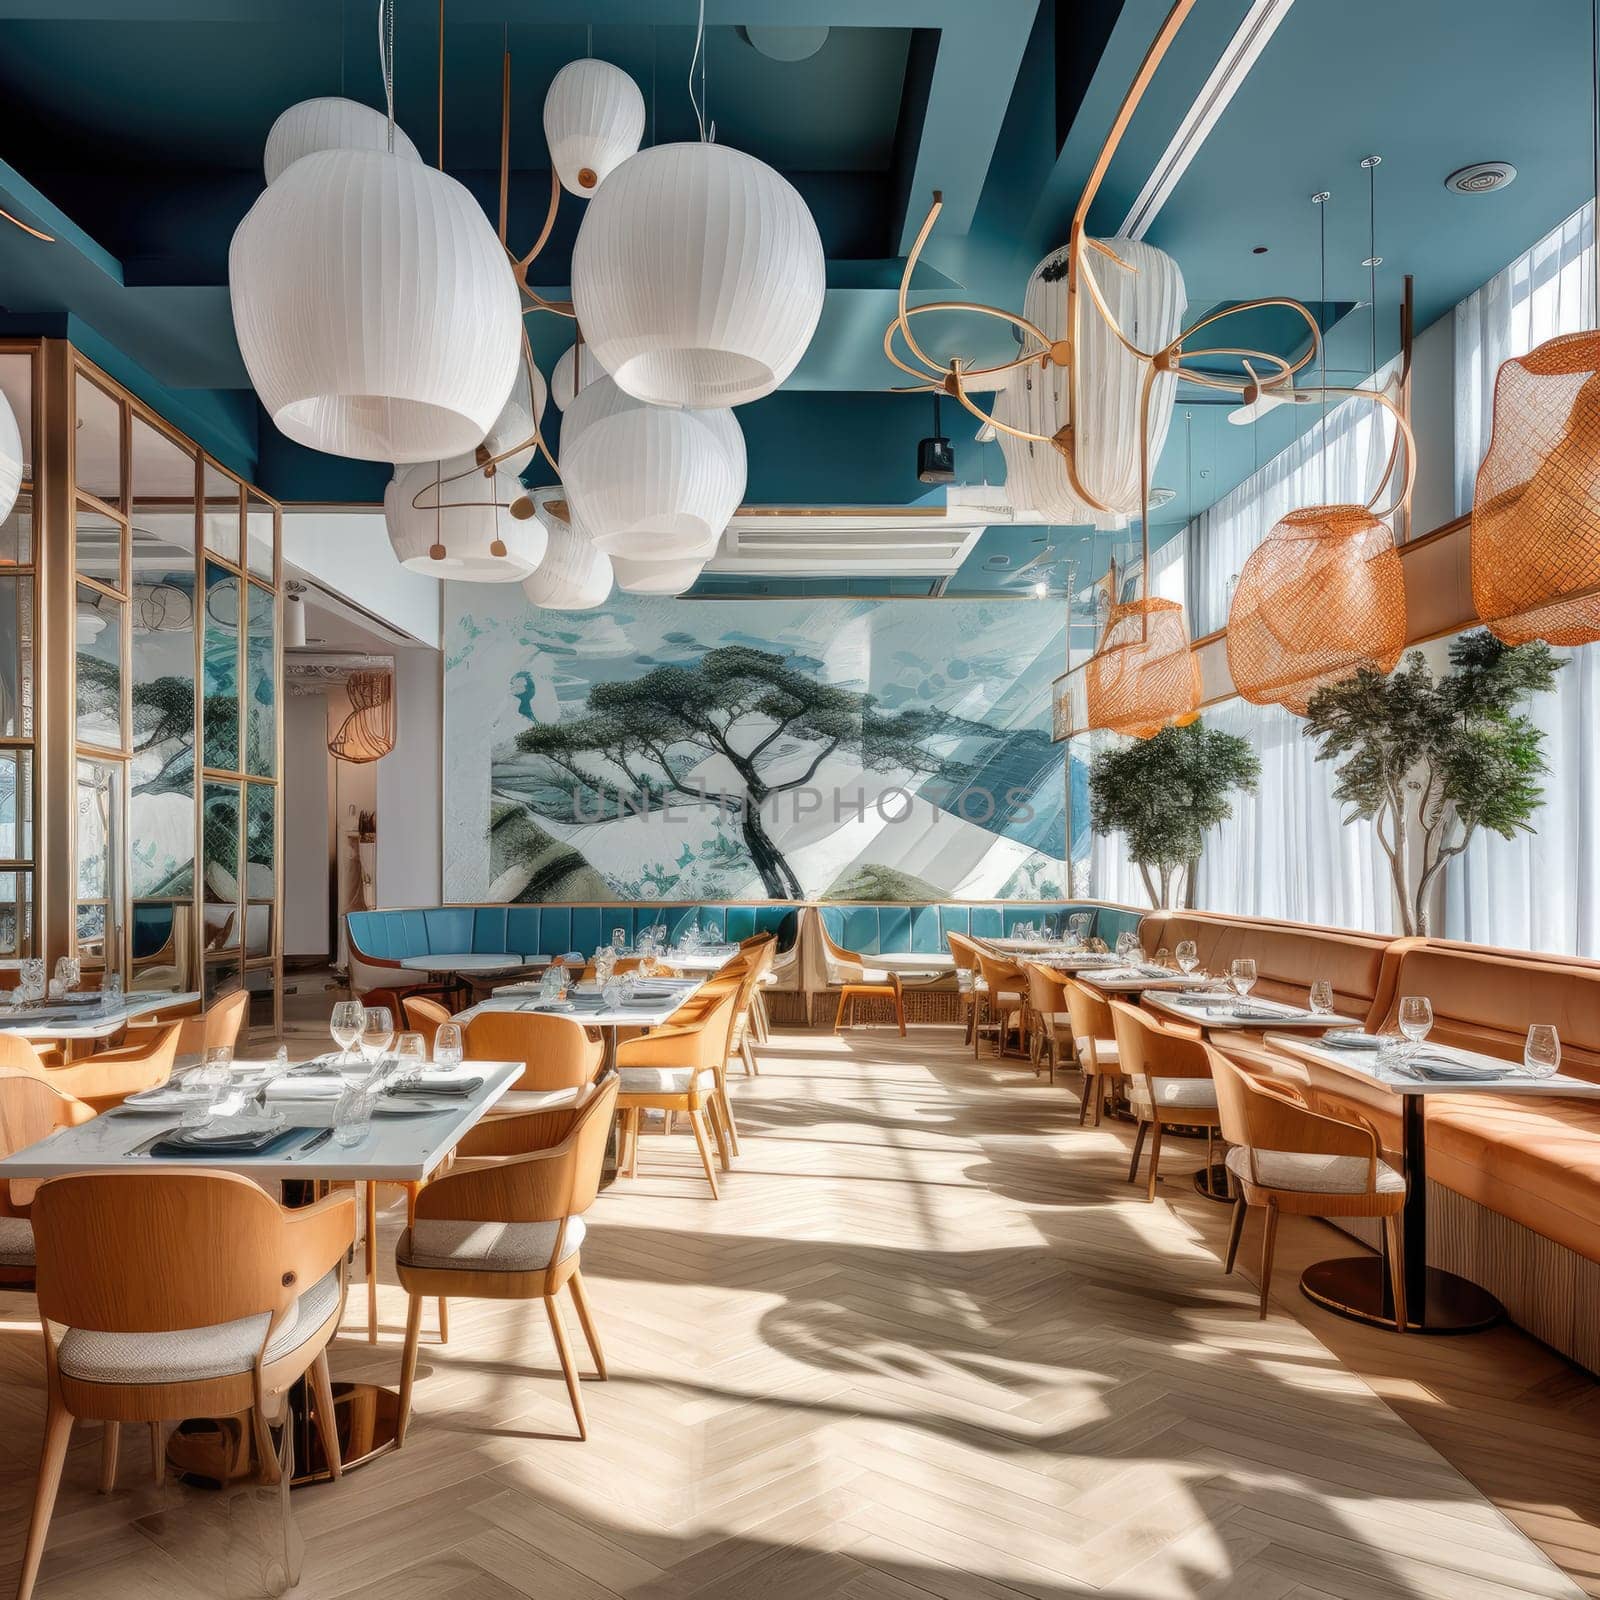 The interior of the seafood restaurant by cherezoff